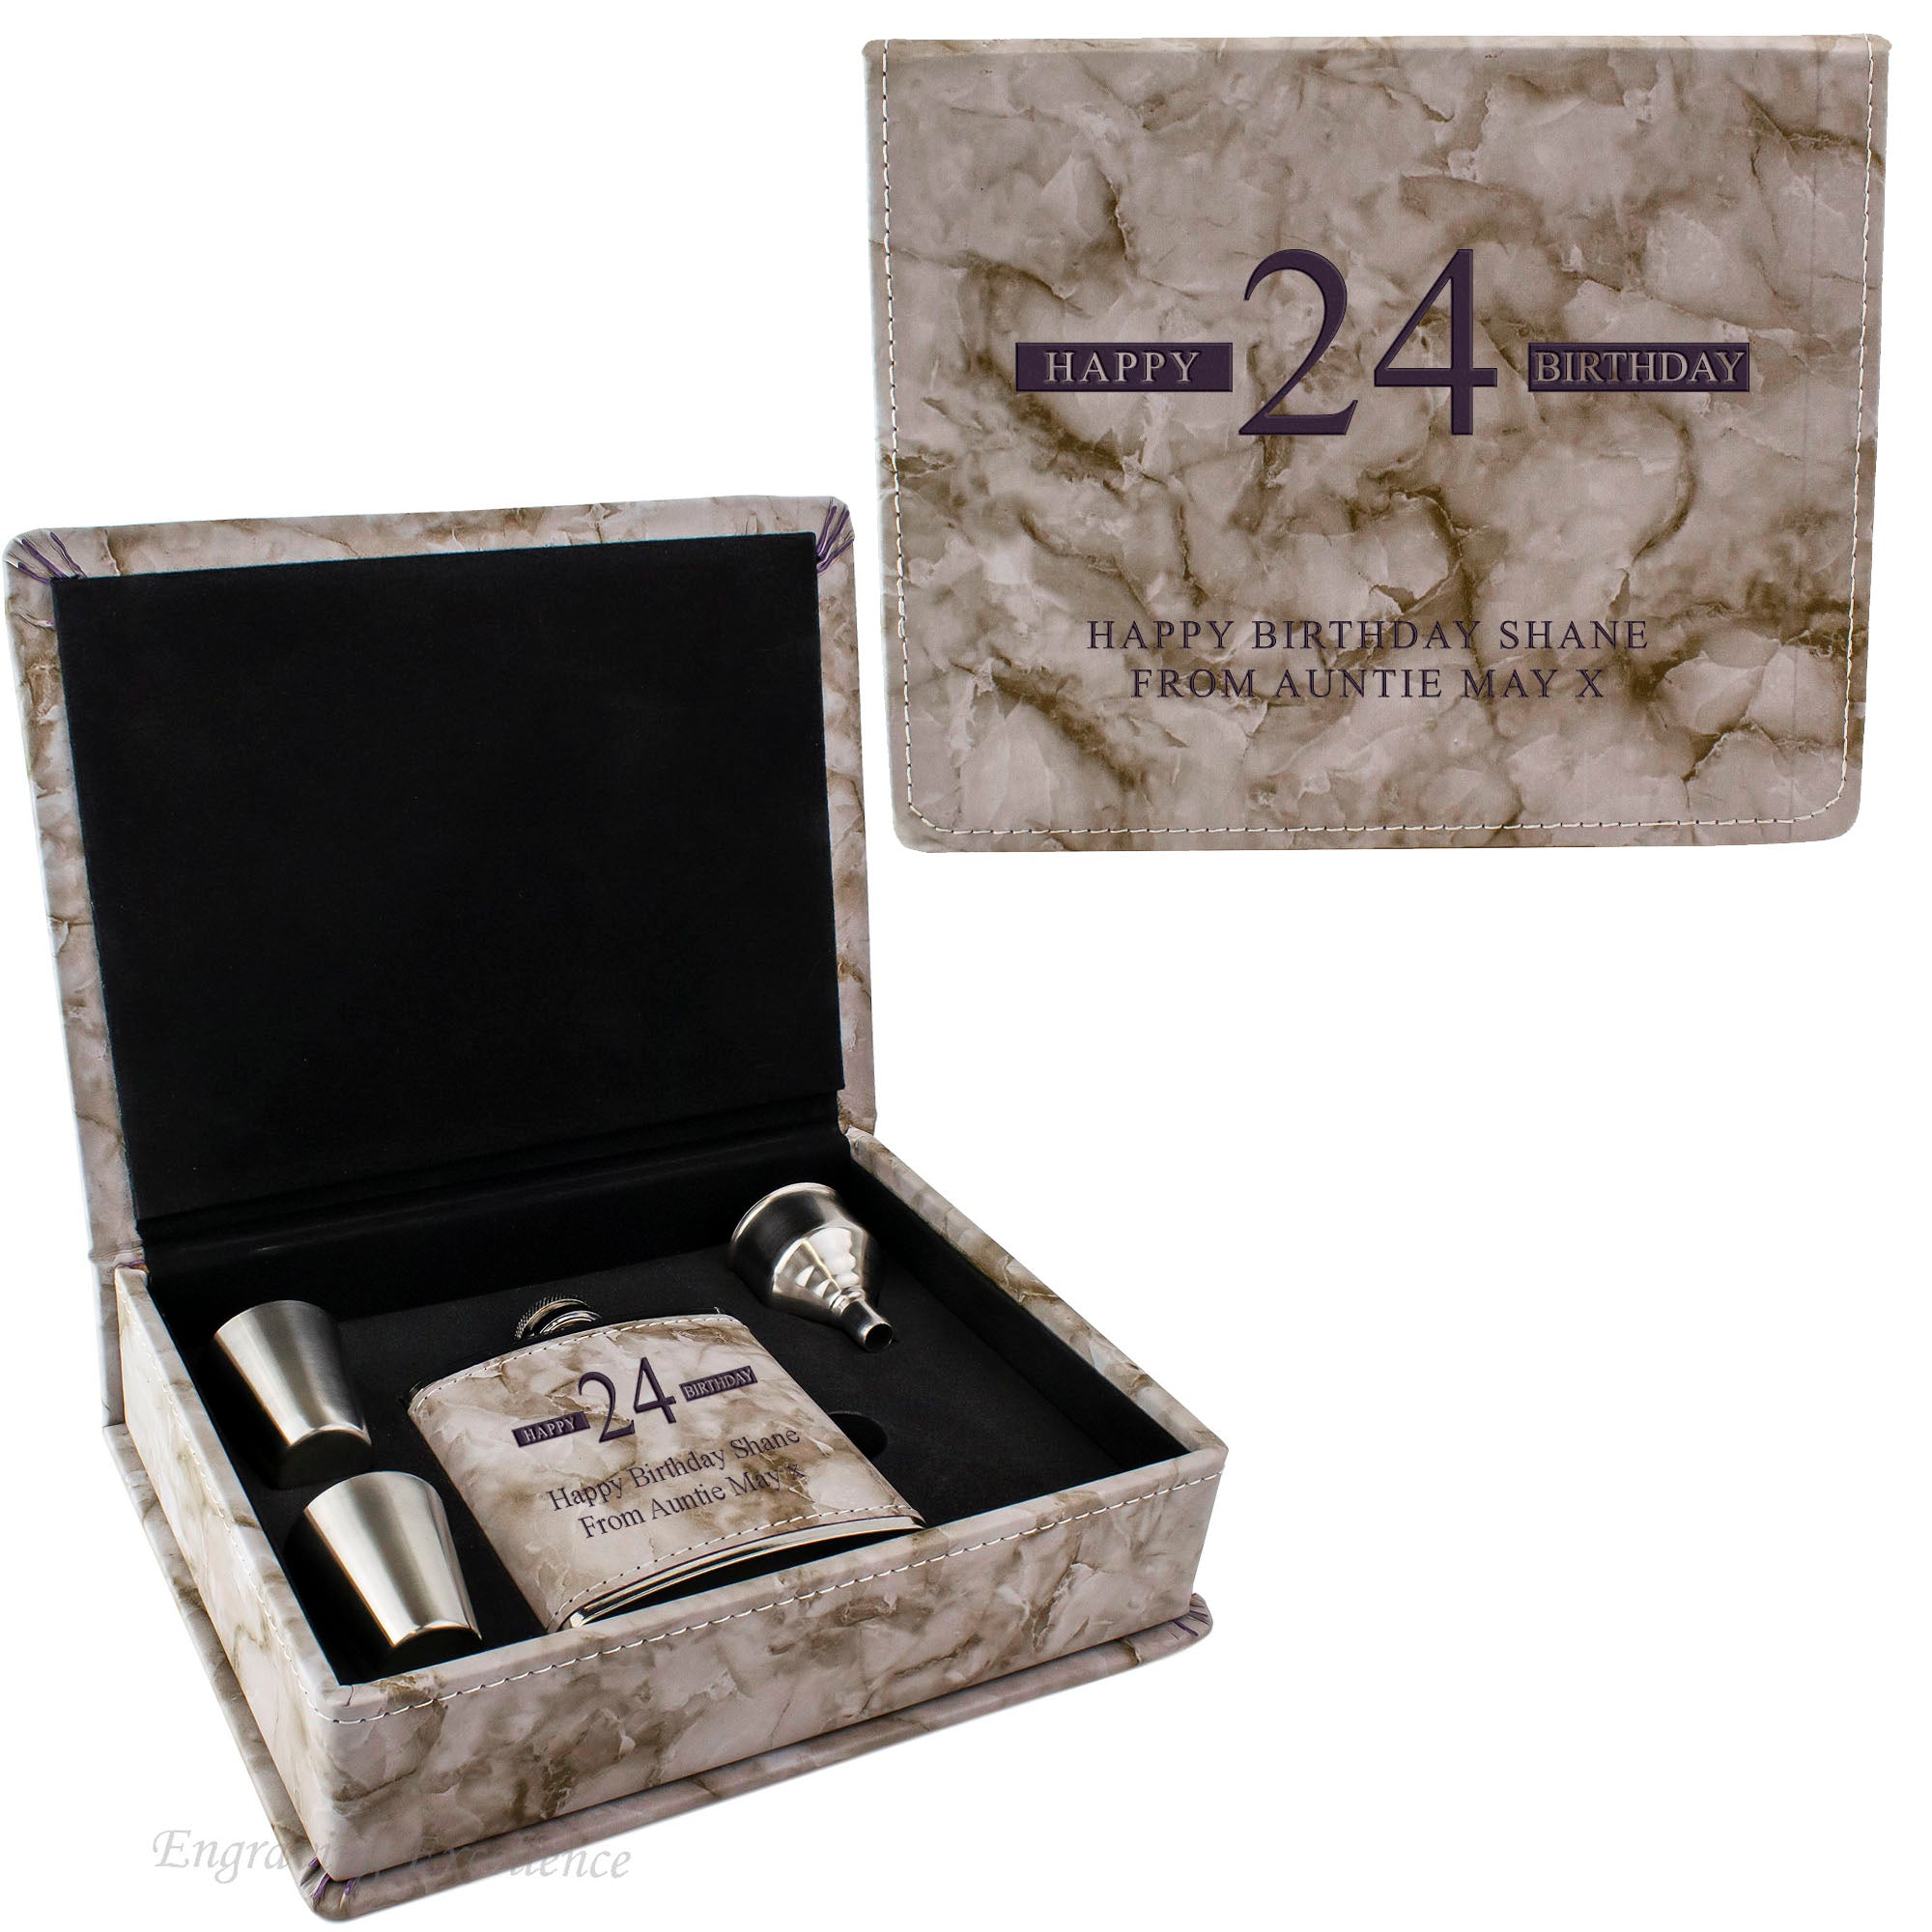 Grey Marble Leather Hip Flask Gift Set - Happy Birthday Style 3